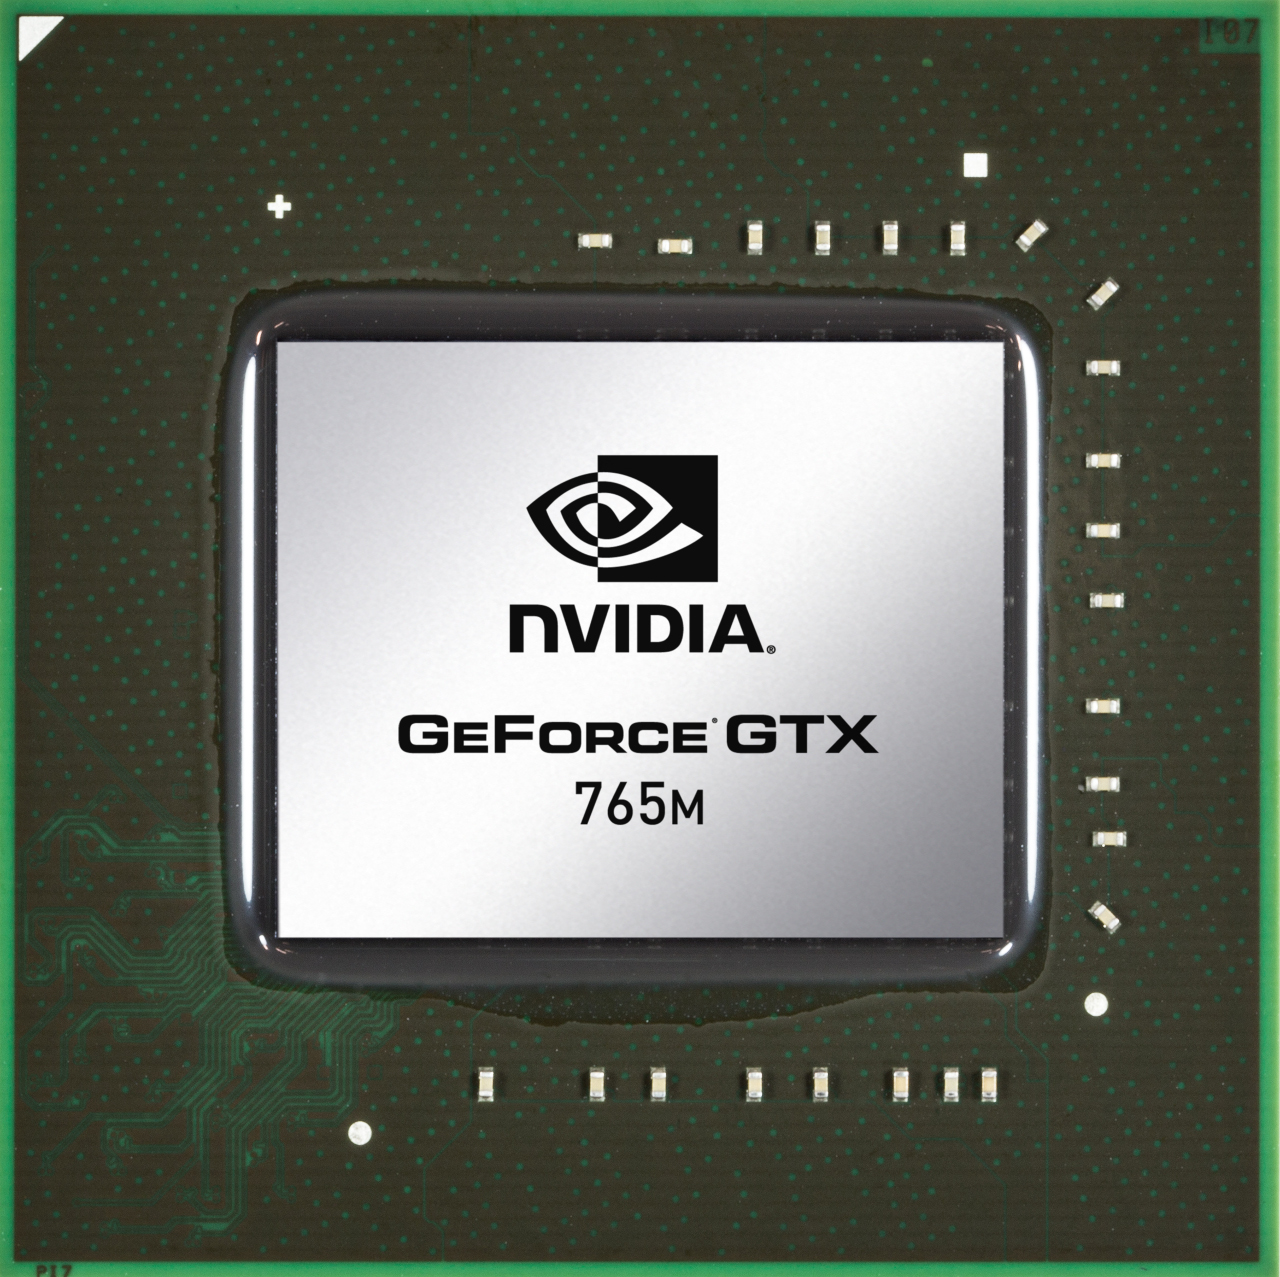 change 3d vision controller to nvidia 770m